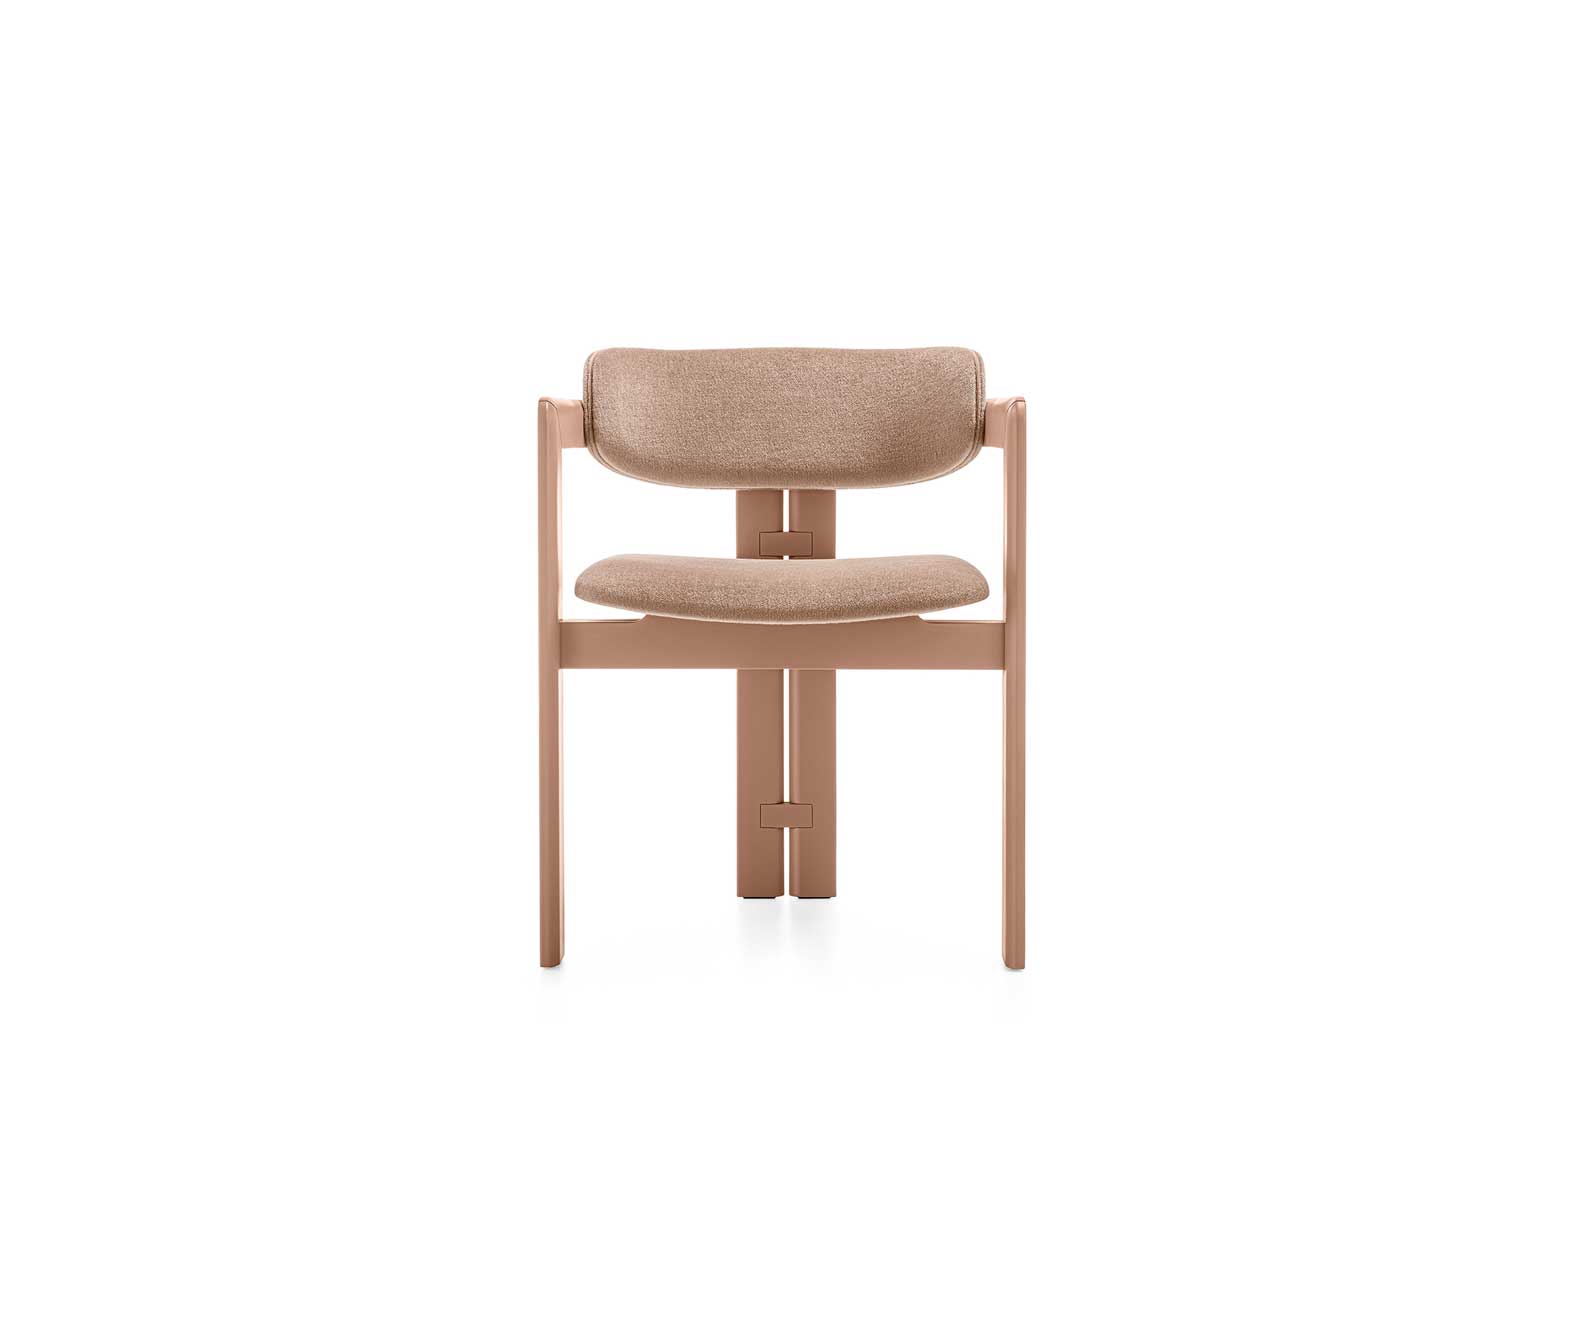 0414-Dining-Chair-Anniverssary-Gallotti-Radice Pink Laquer